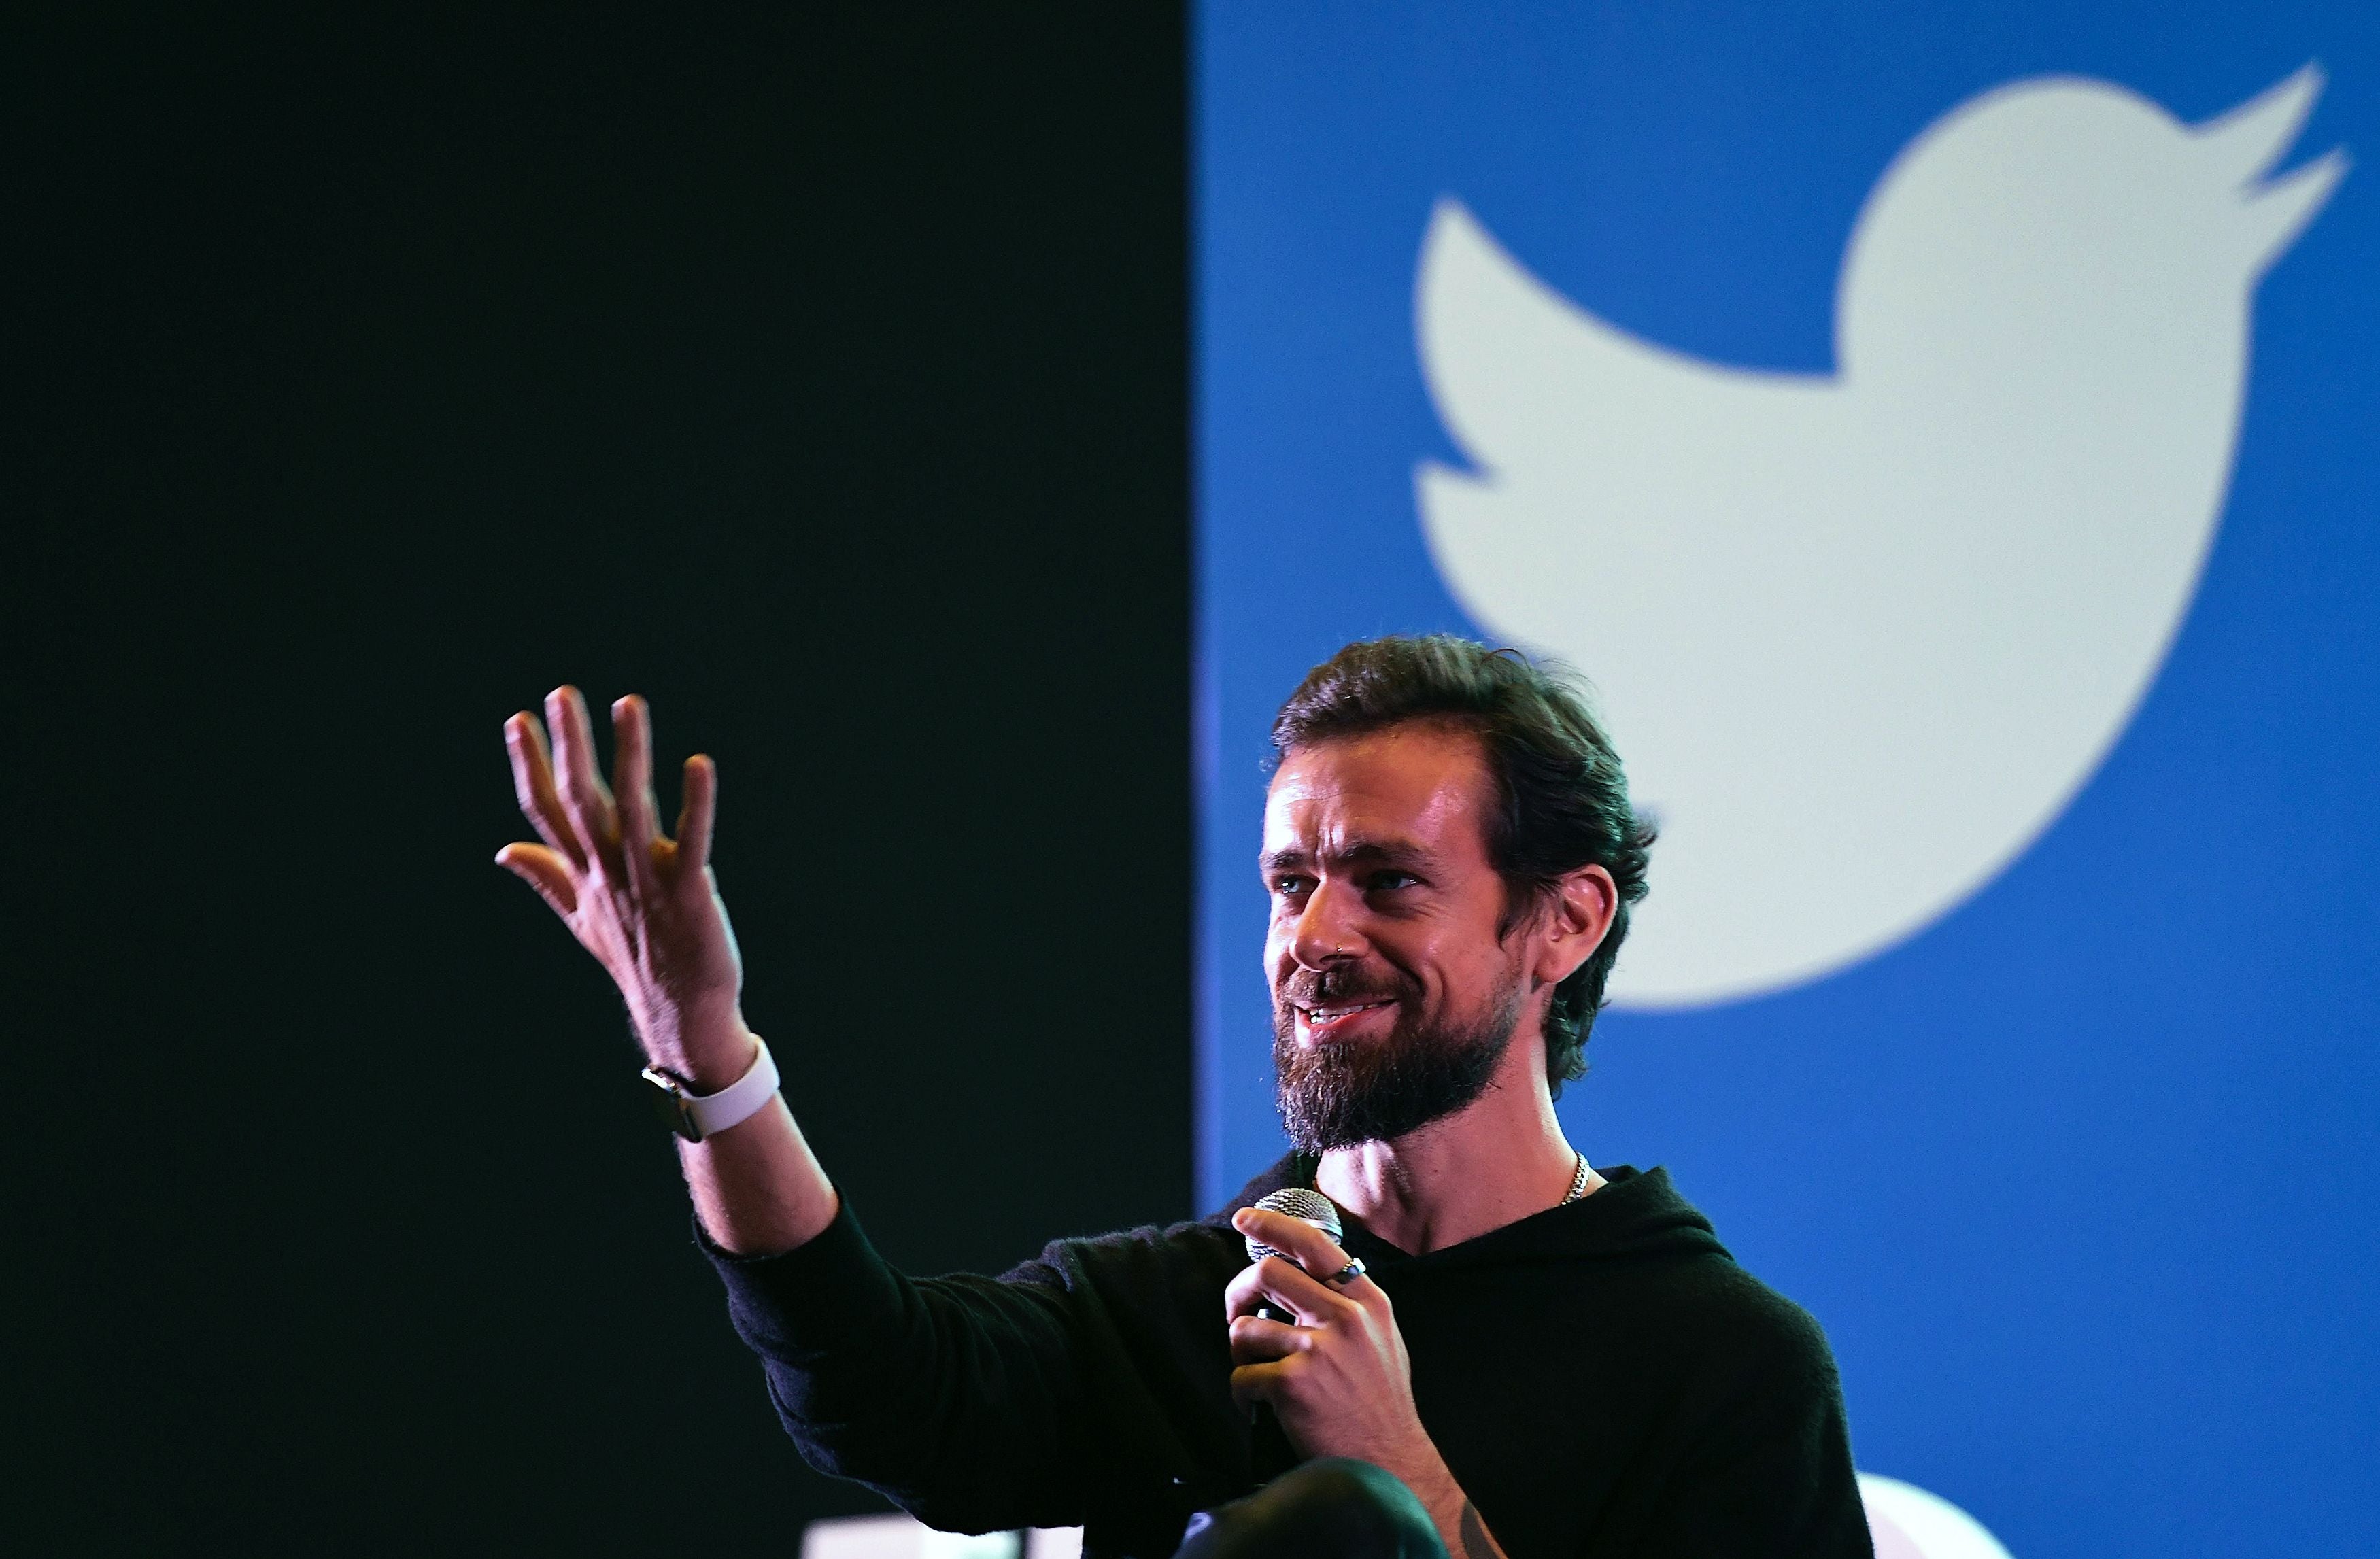 Twitter co-founder Jack Dorsey stepped down as CEO of the social media giant in November 2021 to focus on crypto-related ventures